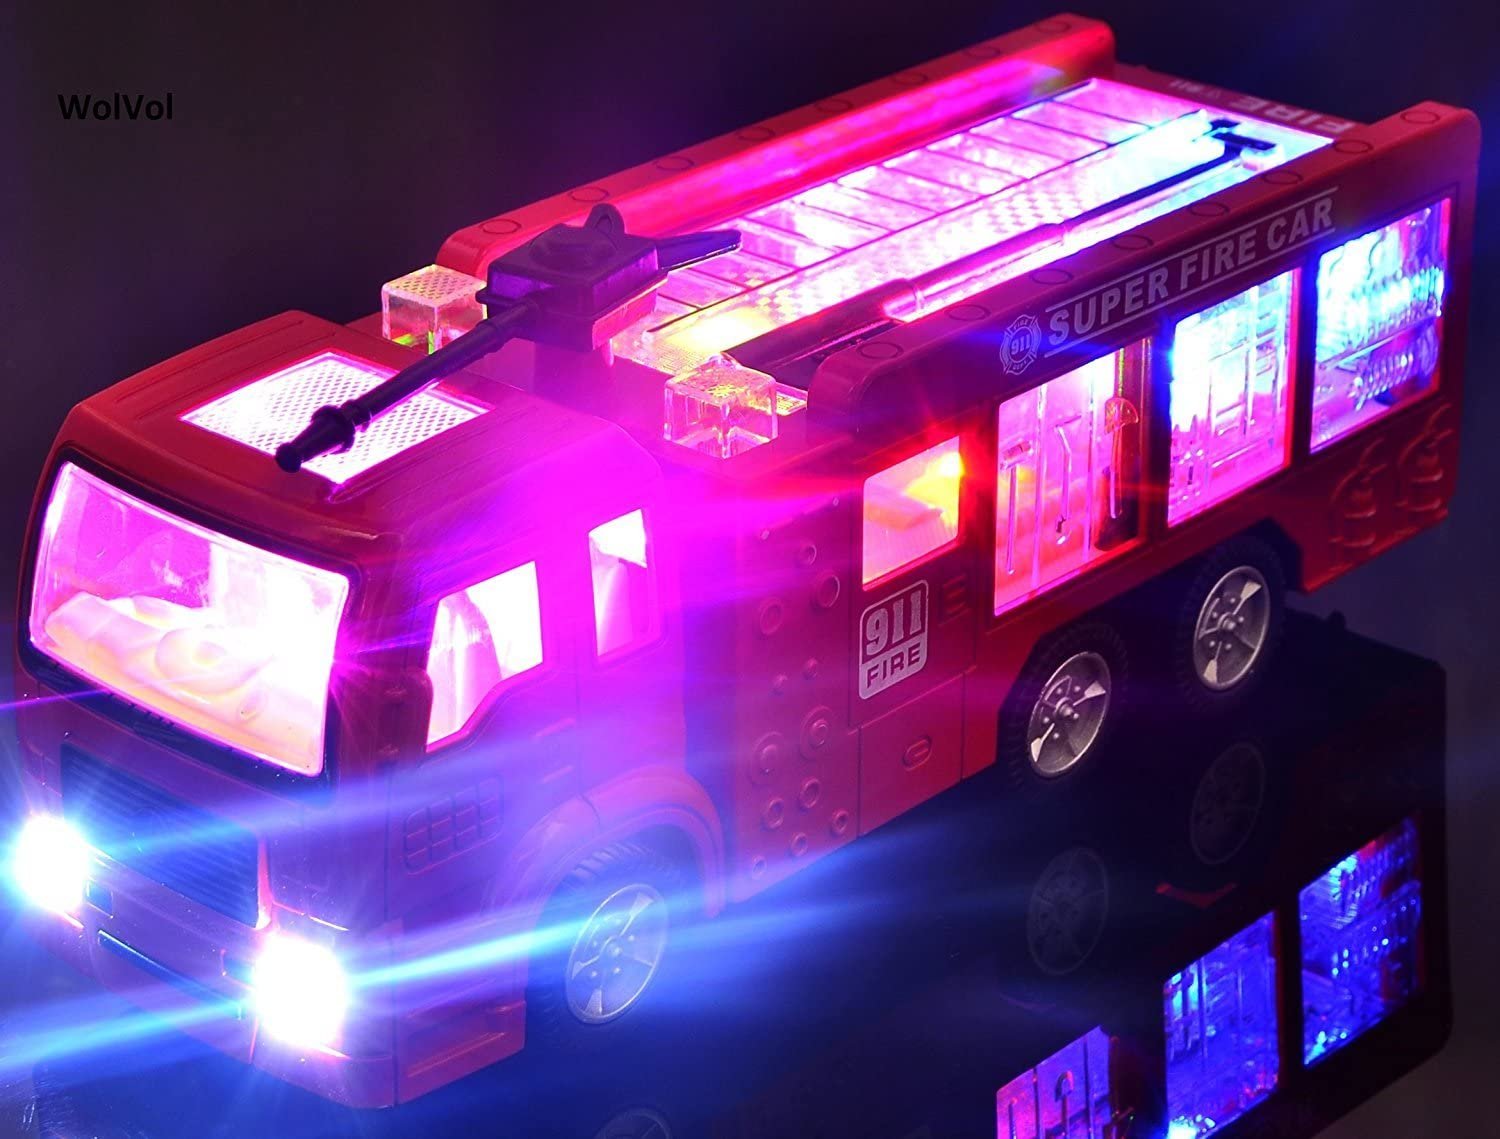 WolVolk Electric Fire Truck Toy with Stunning 3D Lights and Sirens, goes Around and Changes Directions on Contact - Great Gift Toys for Kids